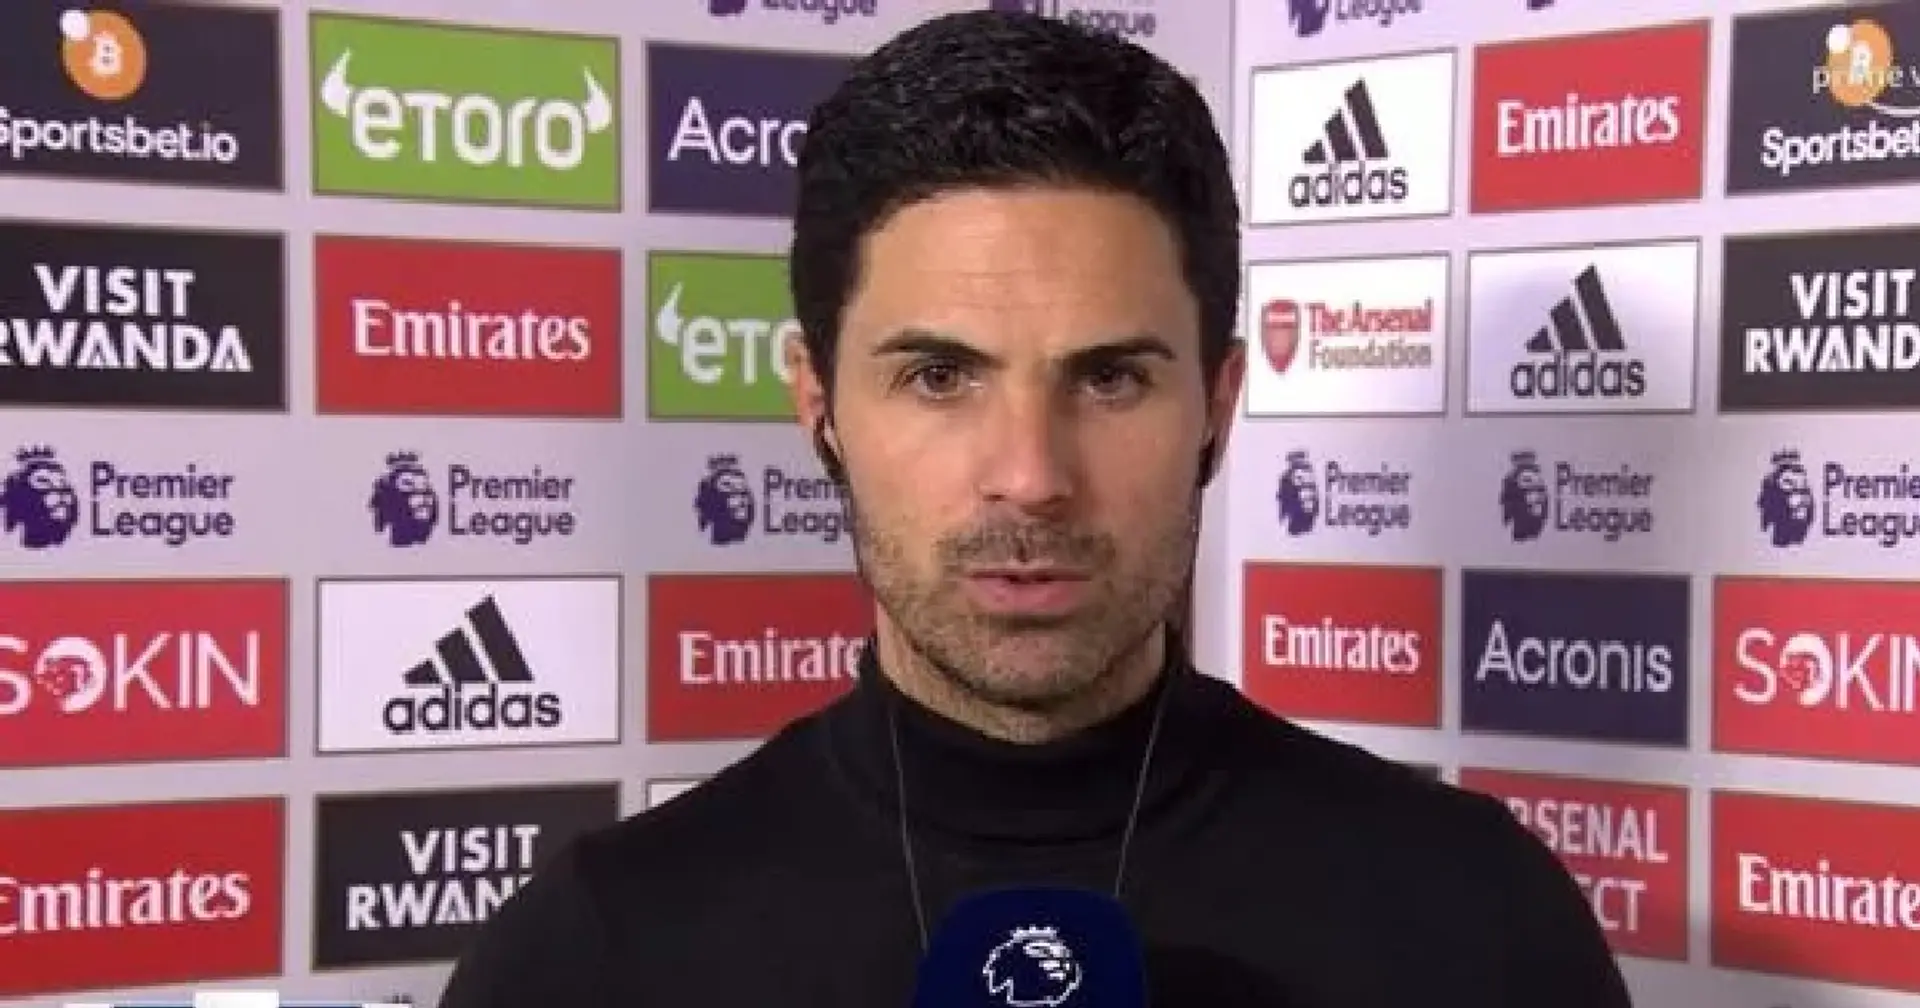 Mikel Arteta after Wolves win: 'There’s only one way down'